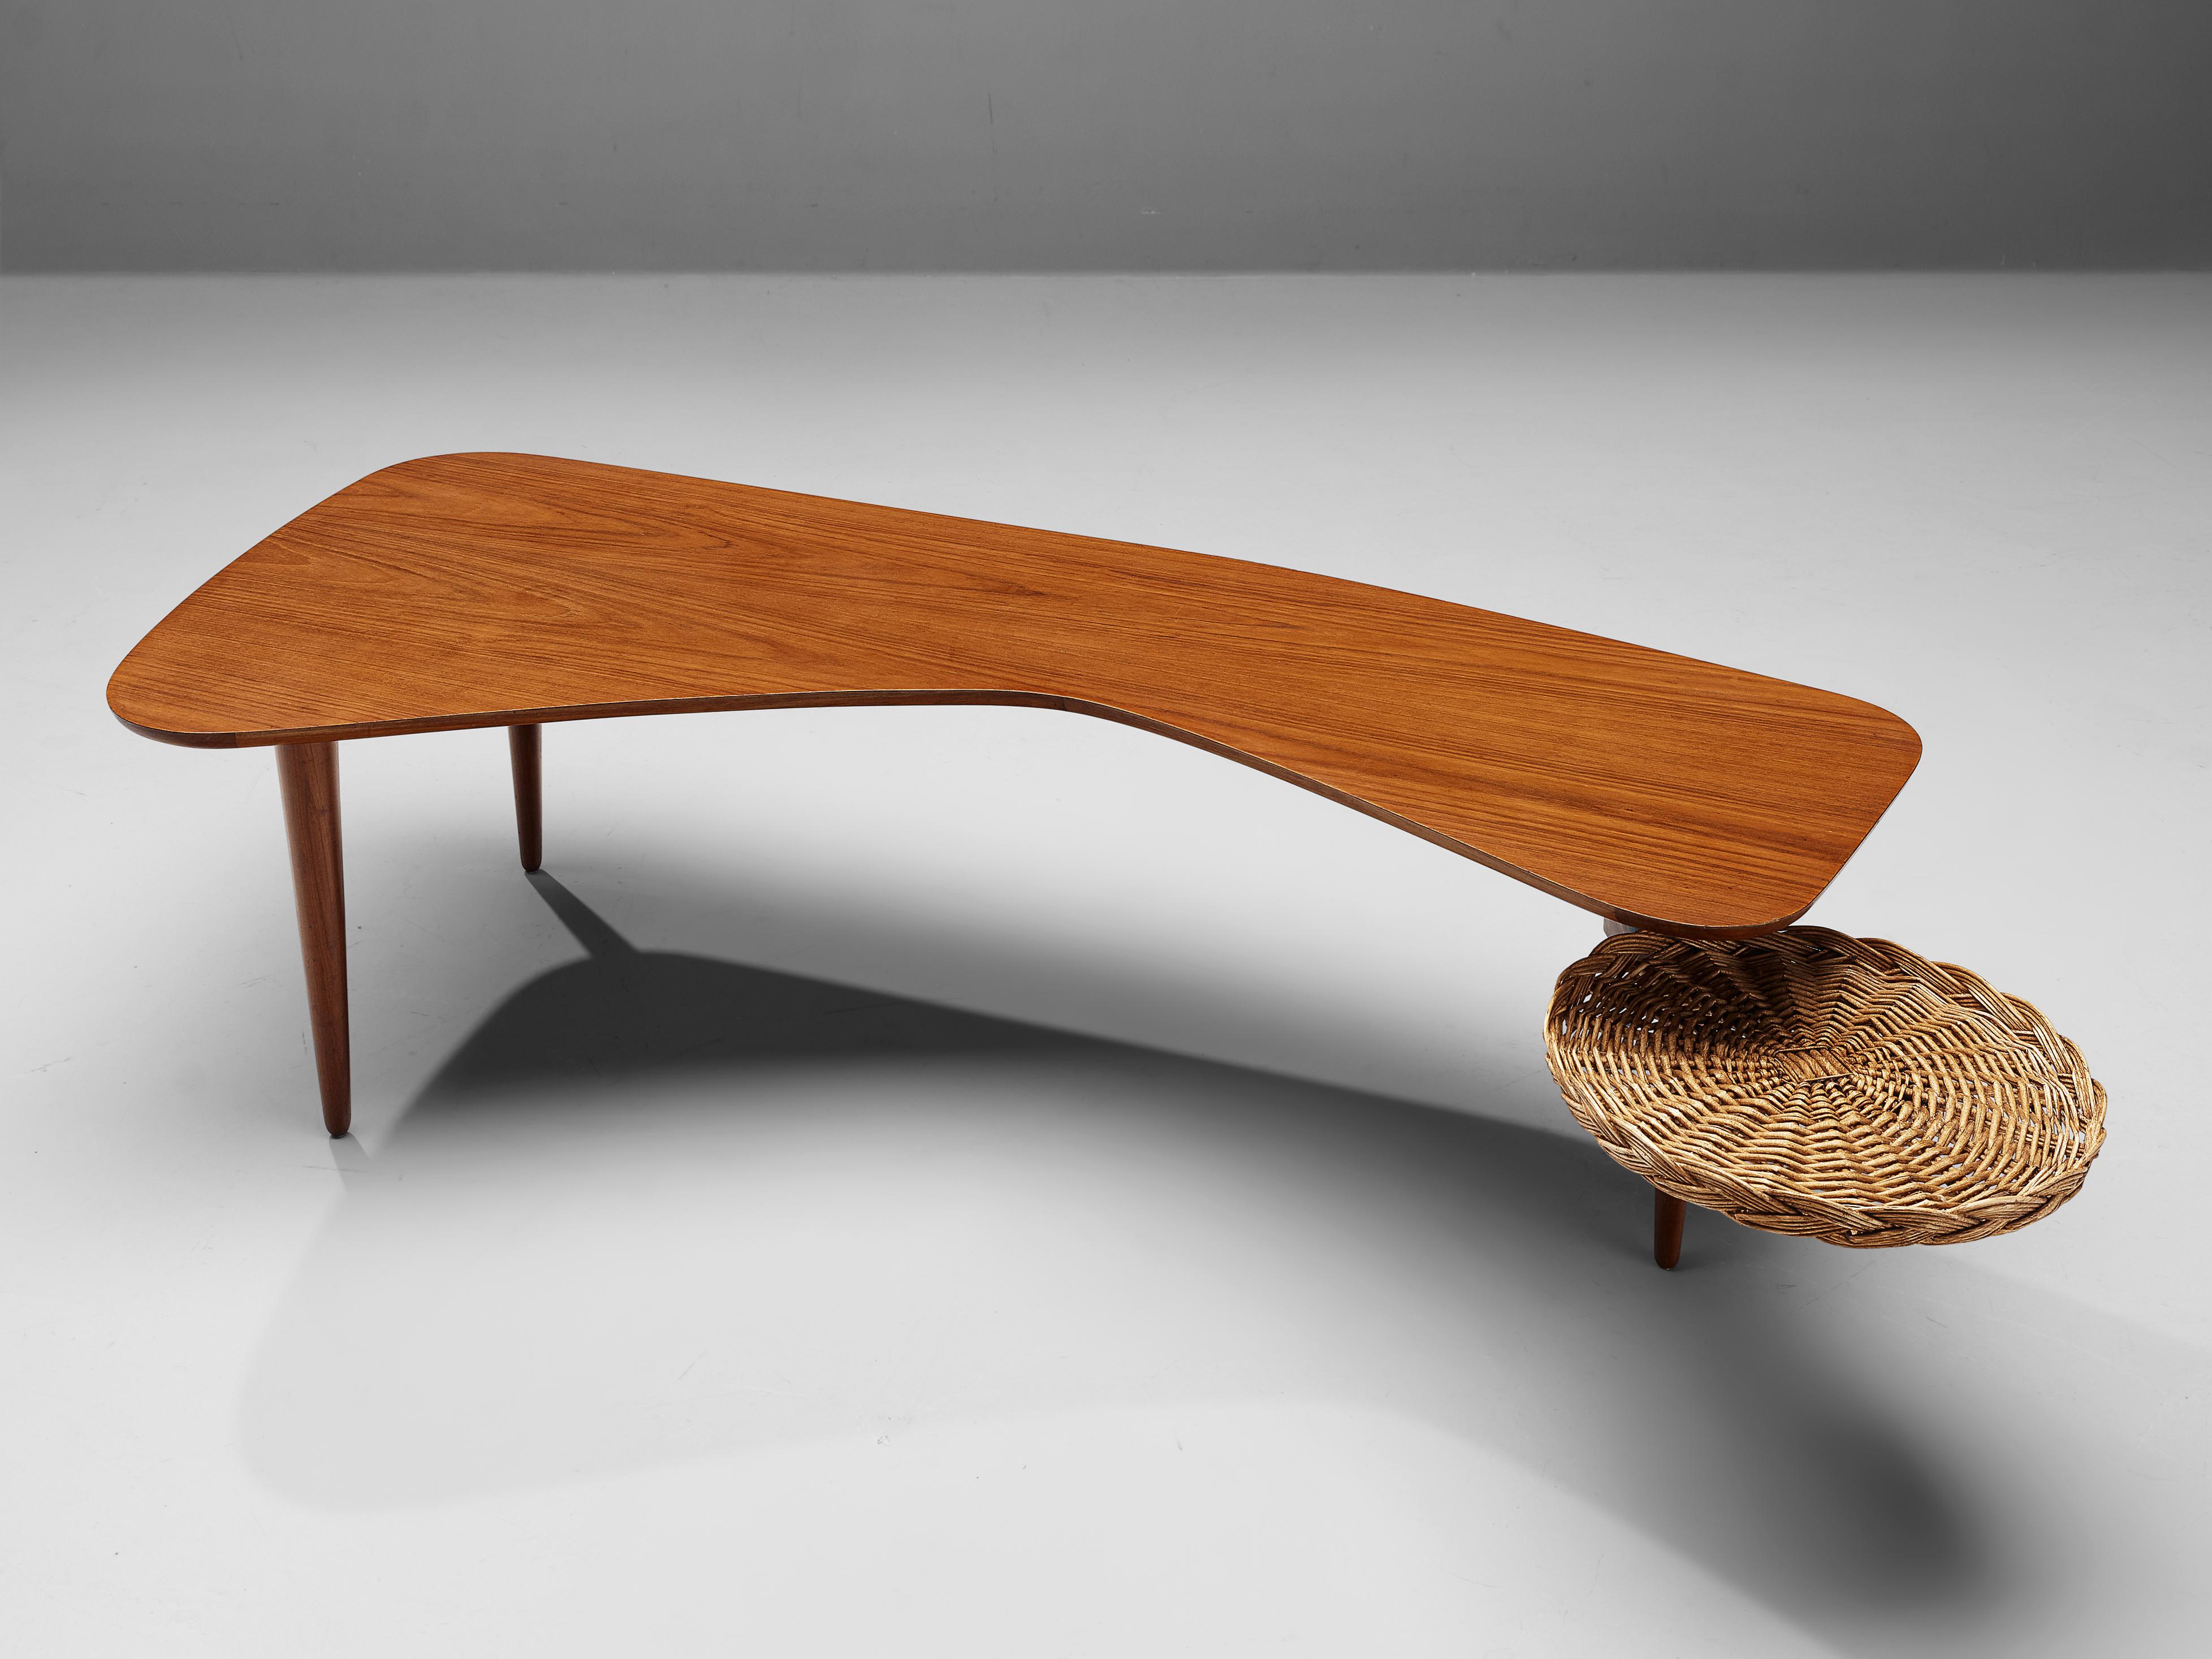 Taichiro Nakay (Nakai) for La Permanente Mobili Cantù, coffee table, teak veneer, reed, wood, Japan/Italy, 1950s

Taichiro Nakay is an incredibly talented Japanese designer who is mostly known for his participation at the Selettiva del Mobili